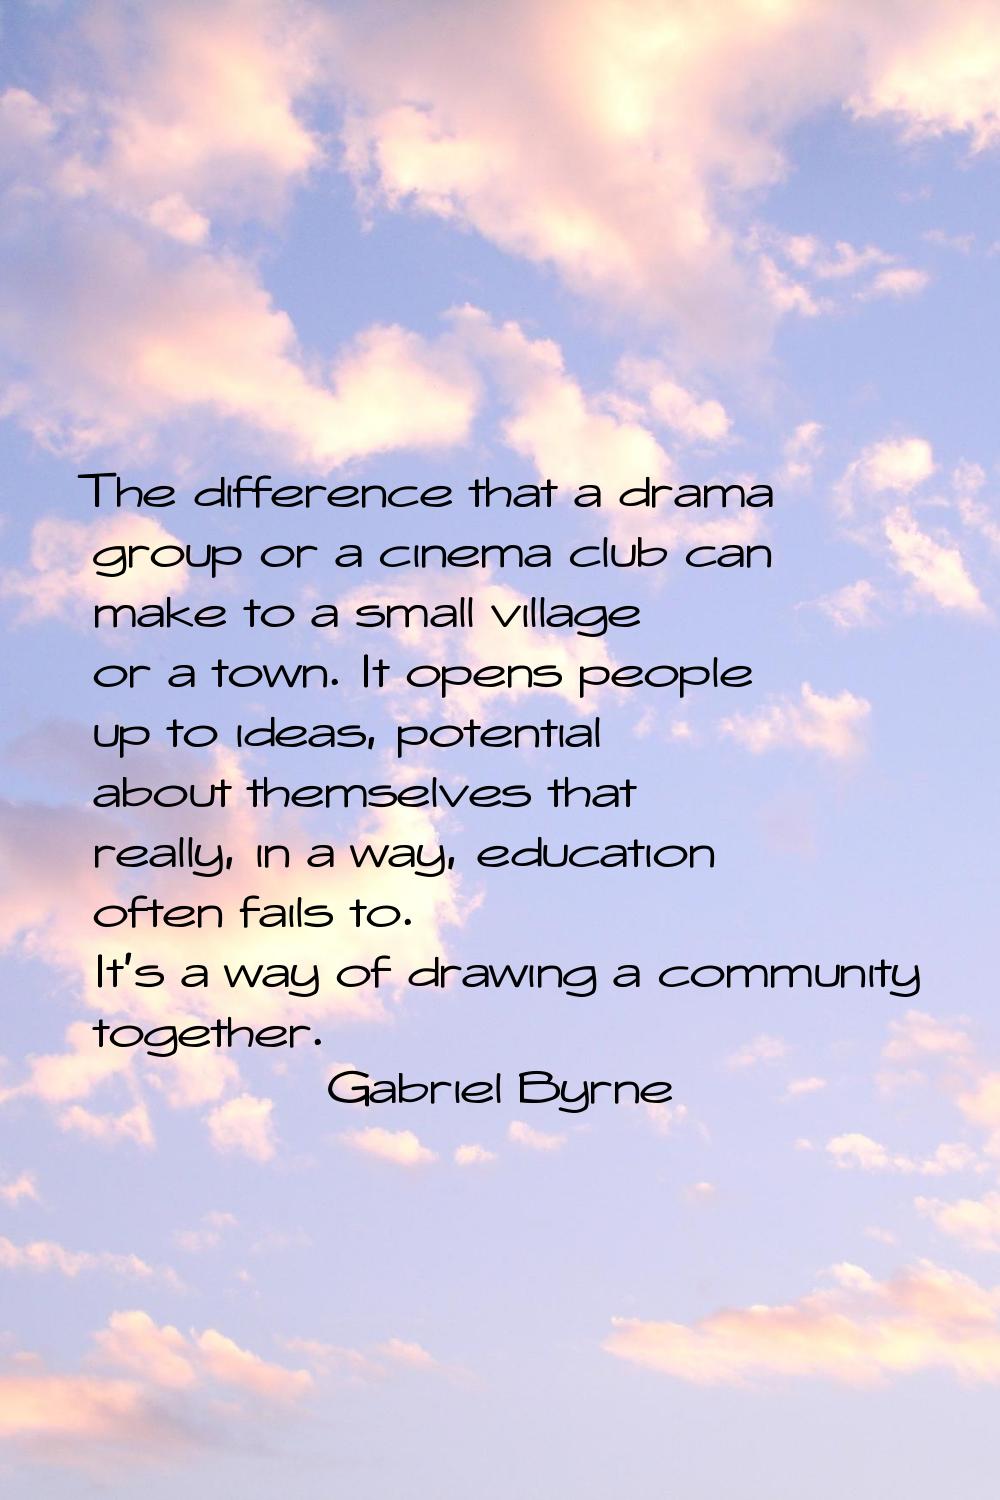 The difference that a drama group or a cinema club can make to a small village or a town. It opens 